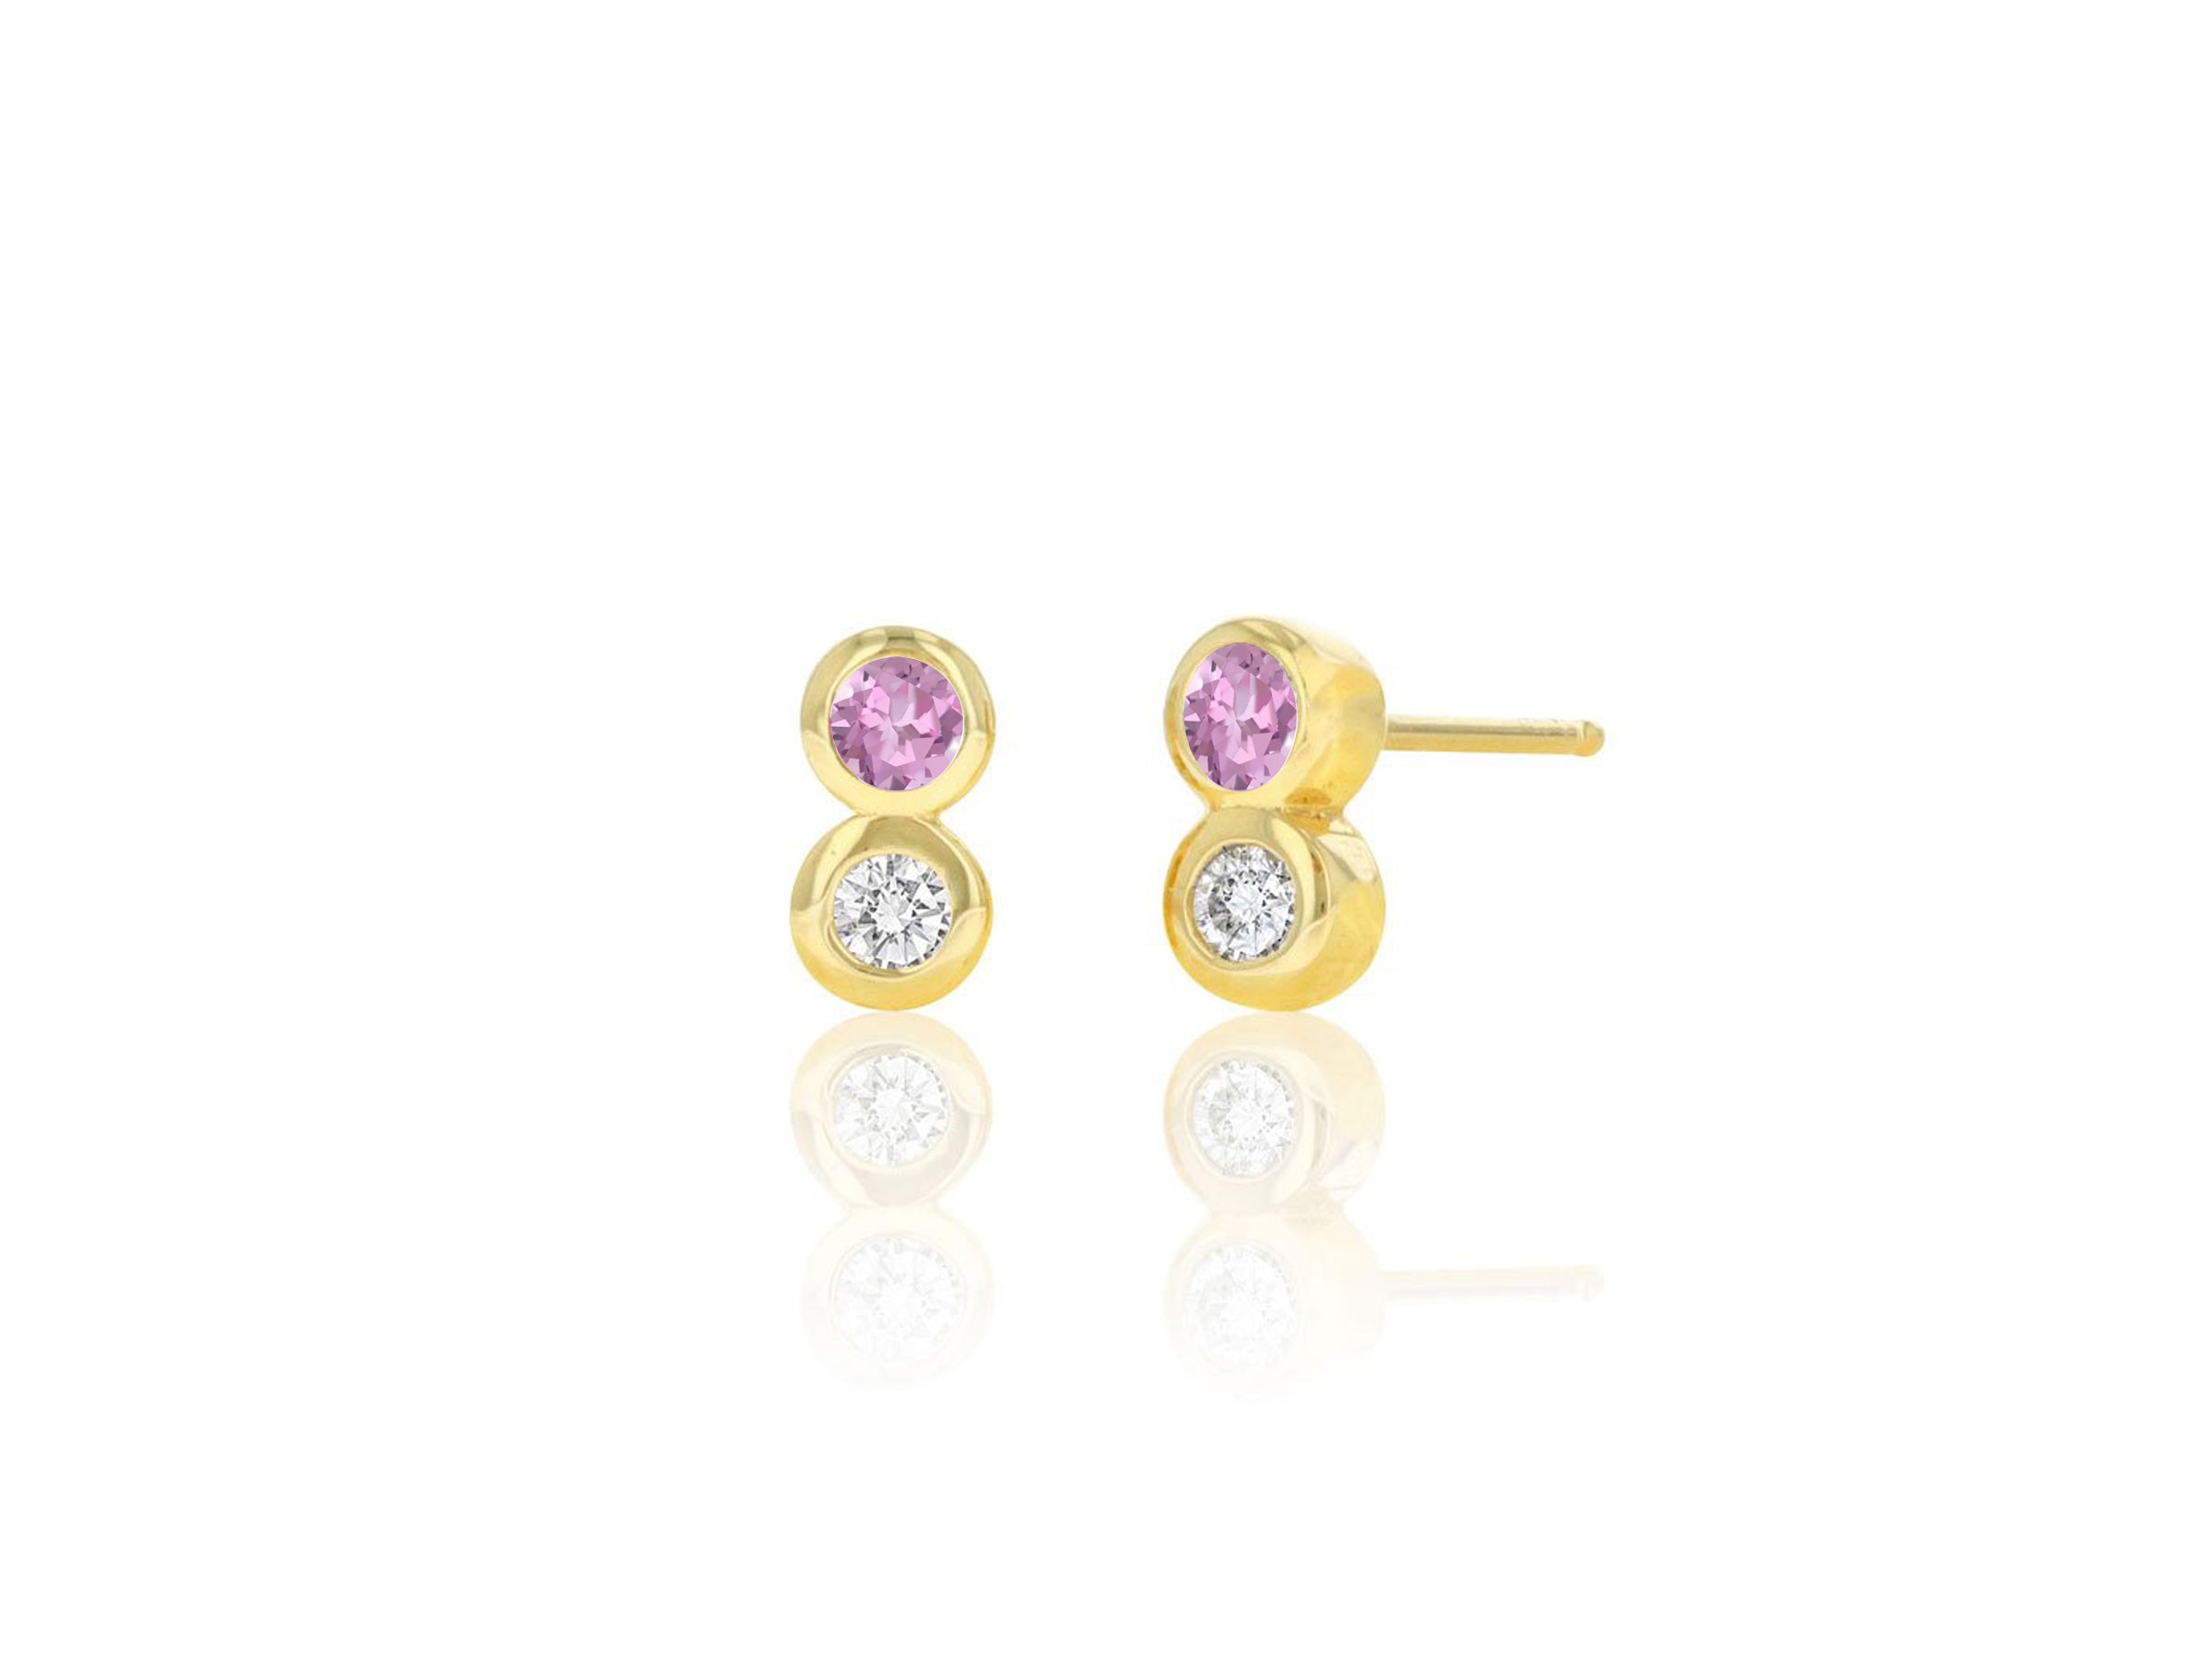 Birthstone Stud Earrings in 14K Gold or 14K White Gold - Pink Sapphire